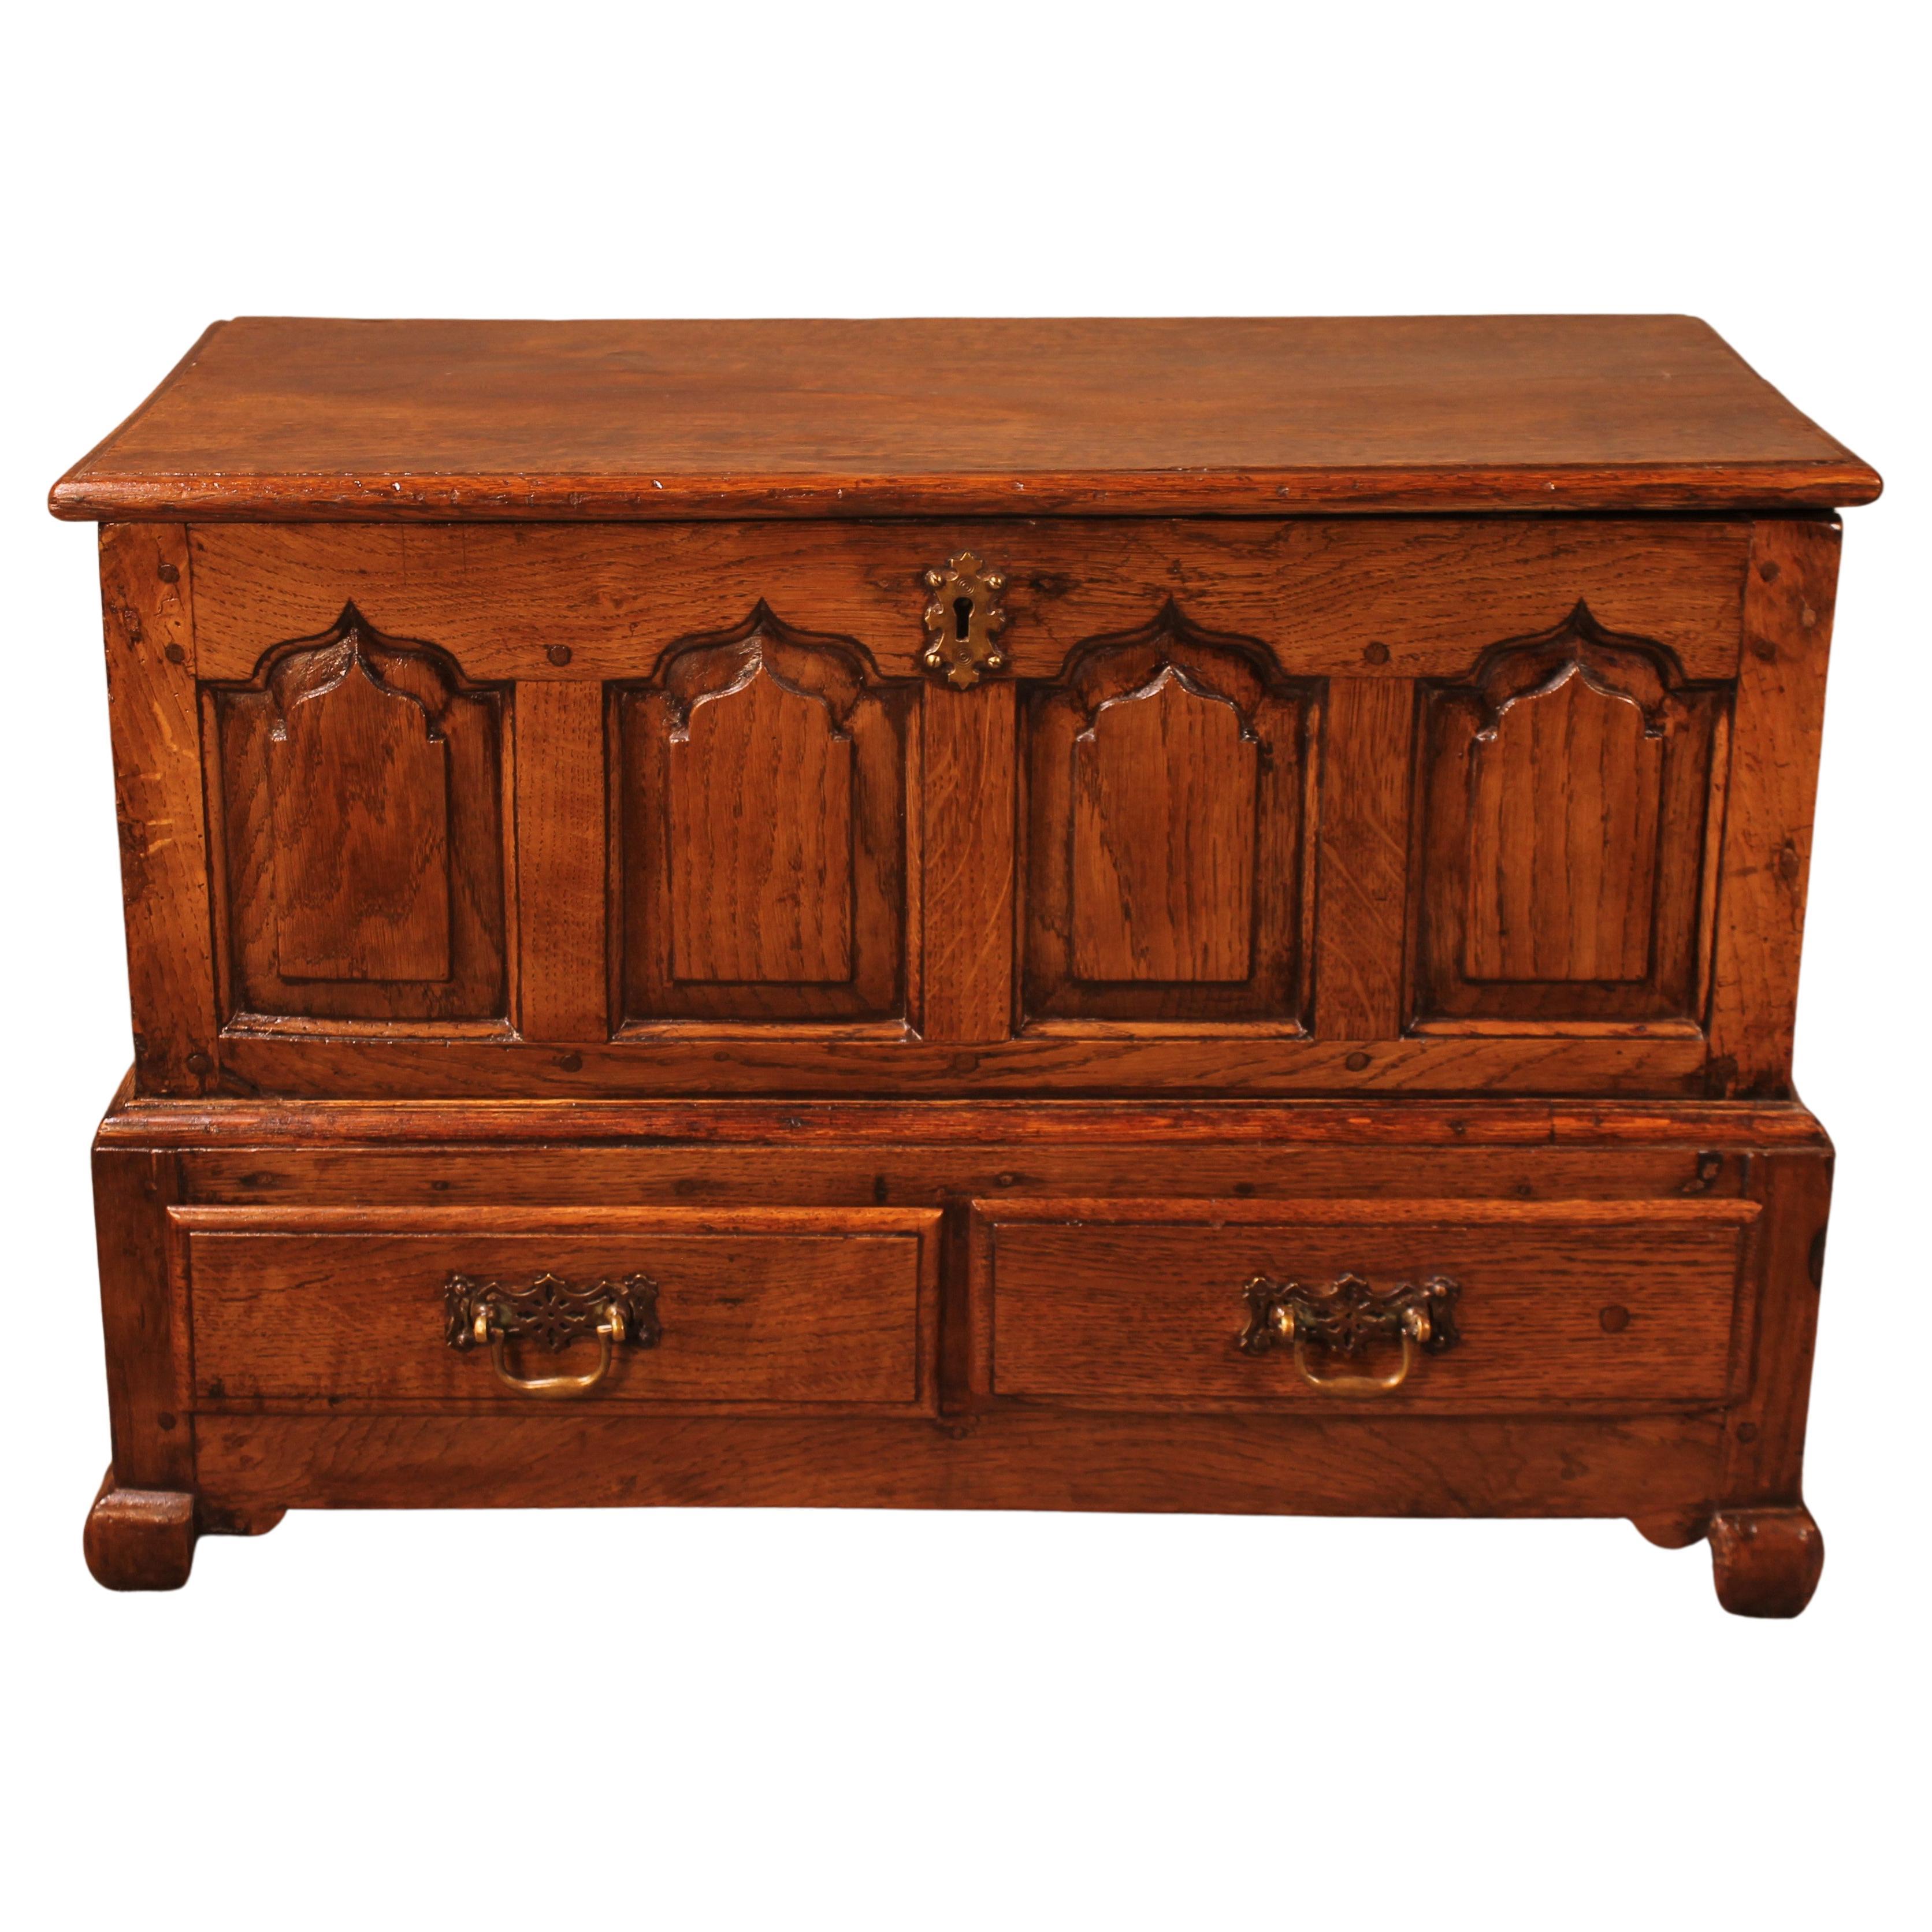 Small English Chest in Oak from the 18th Century